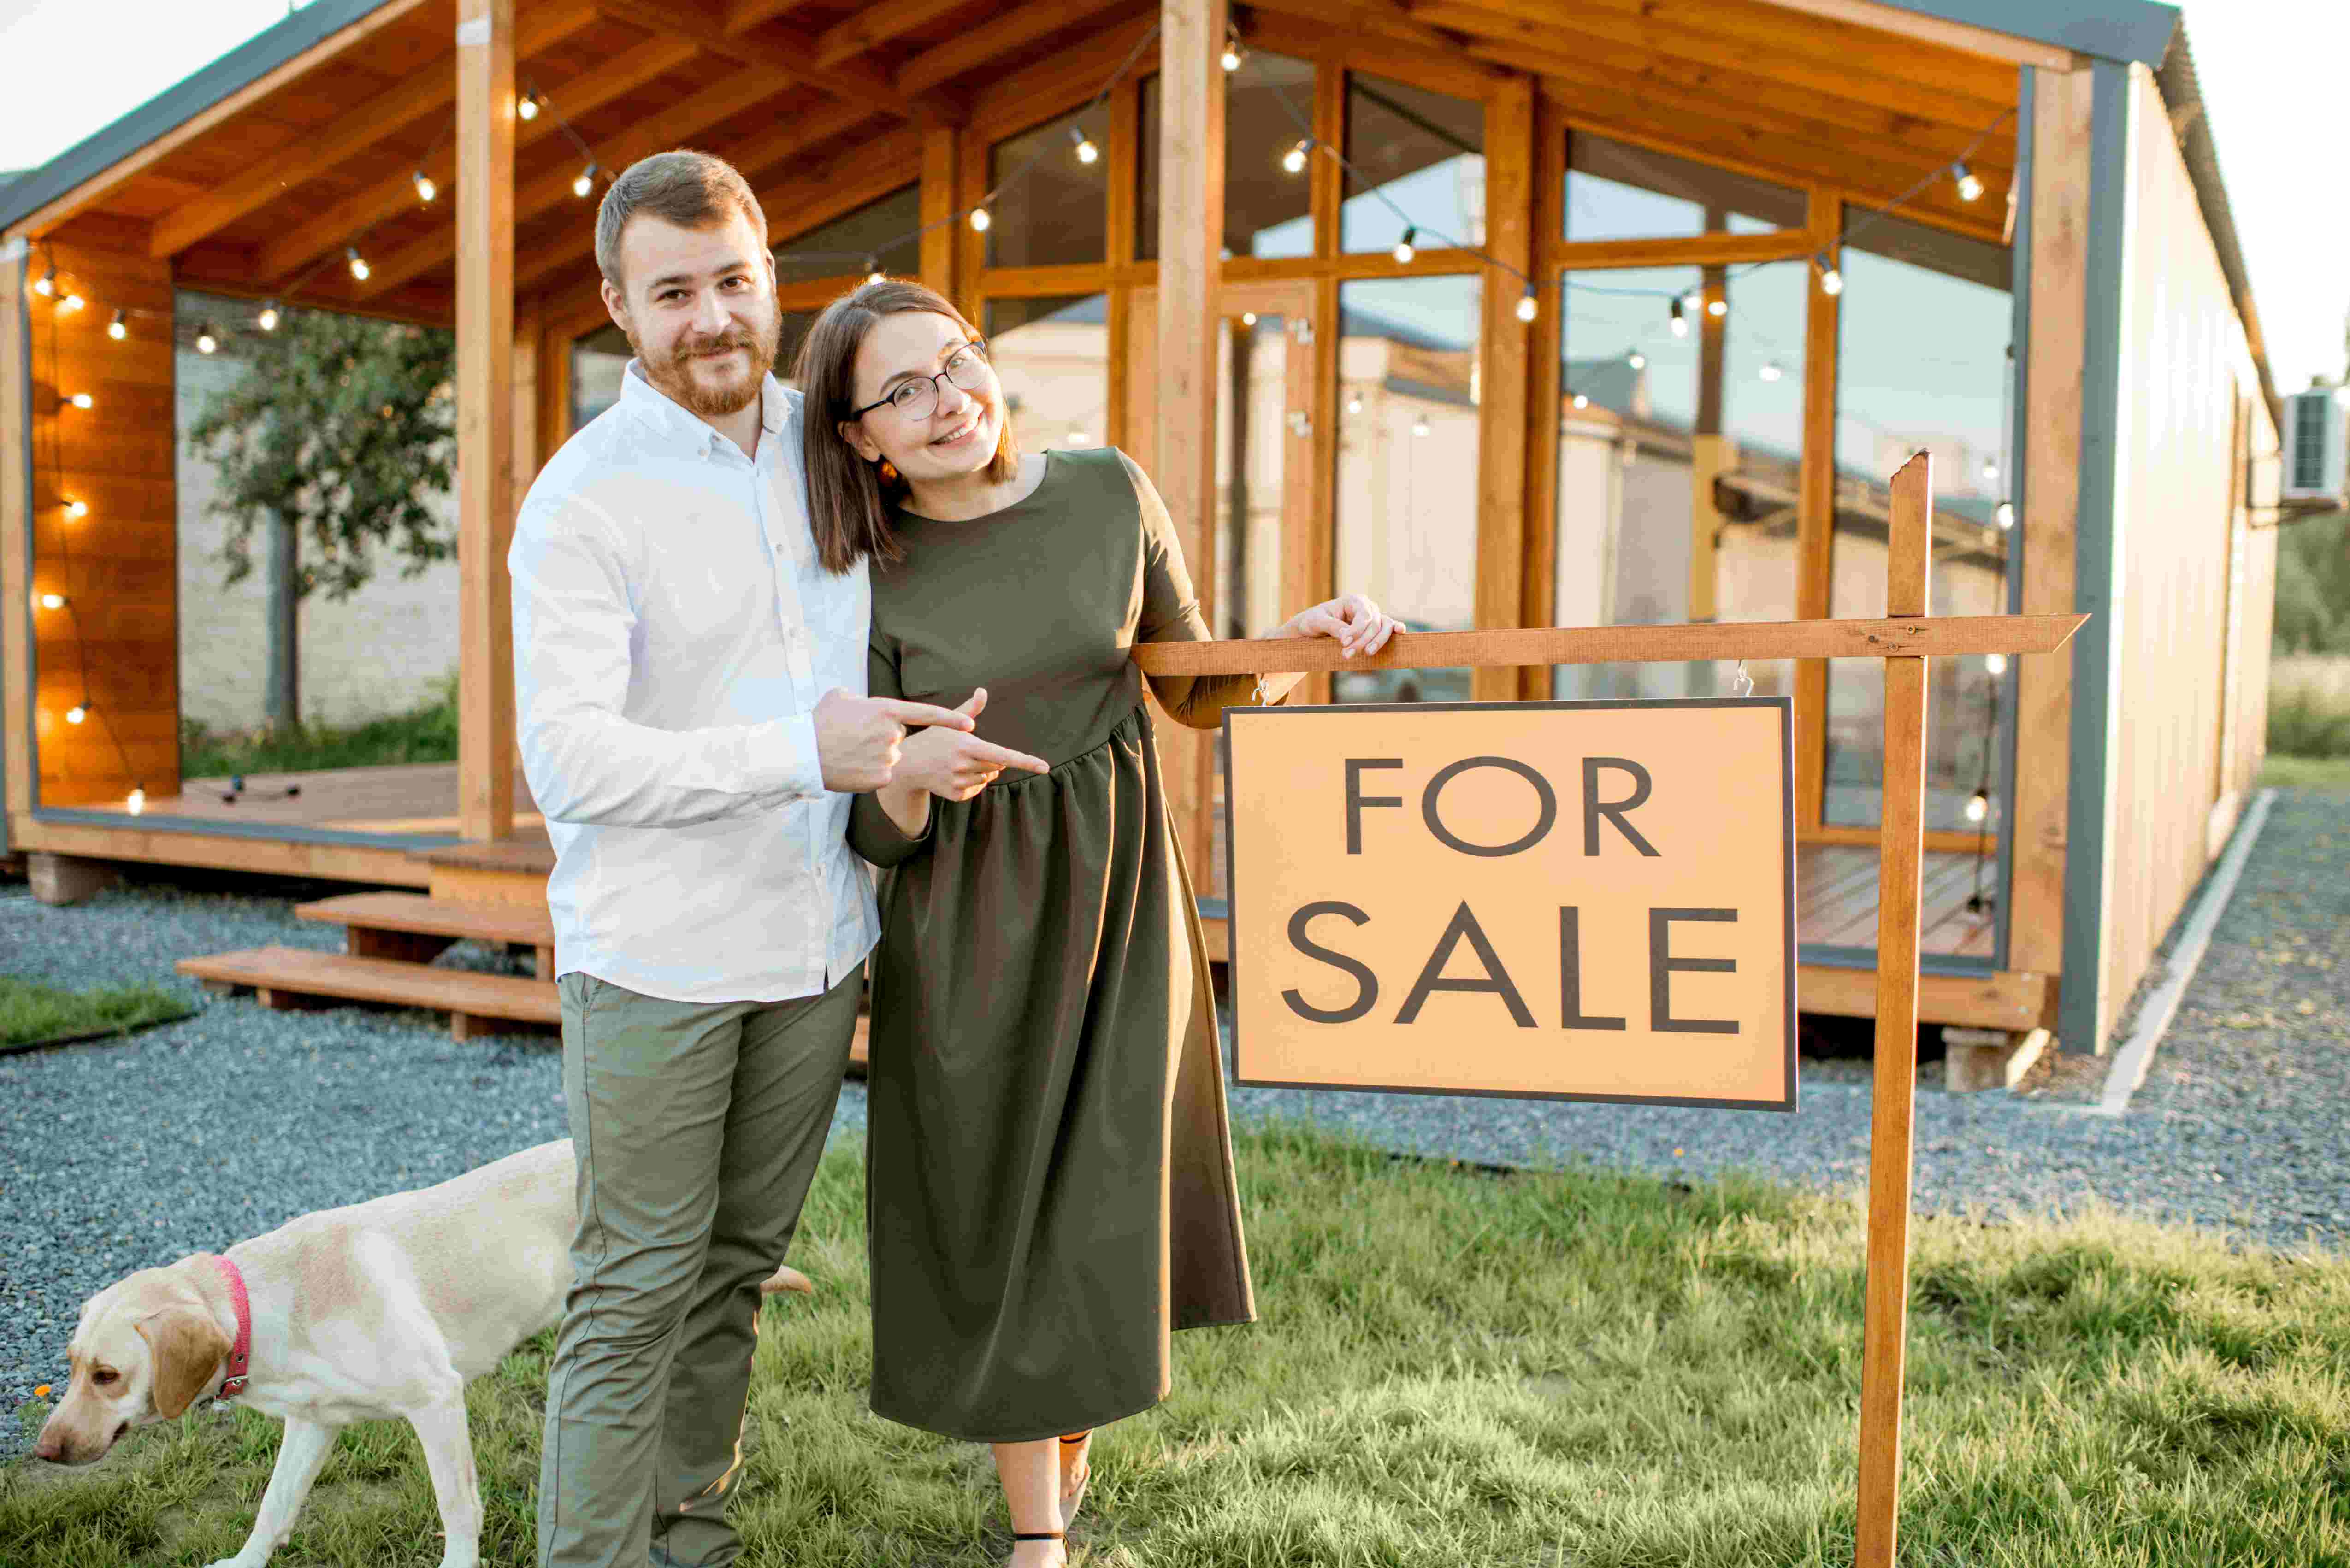 Reasons why selling your home for cash makes sense